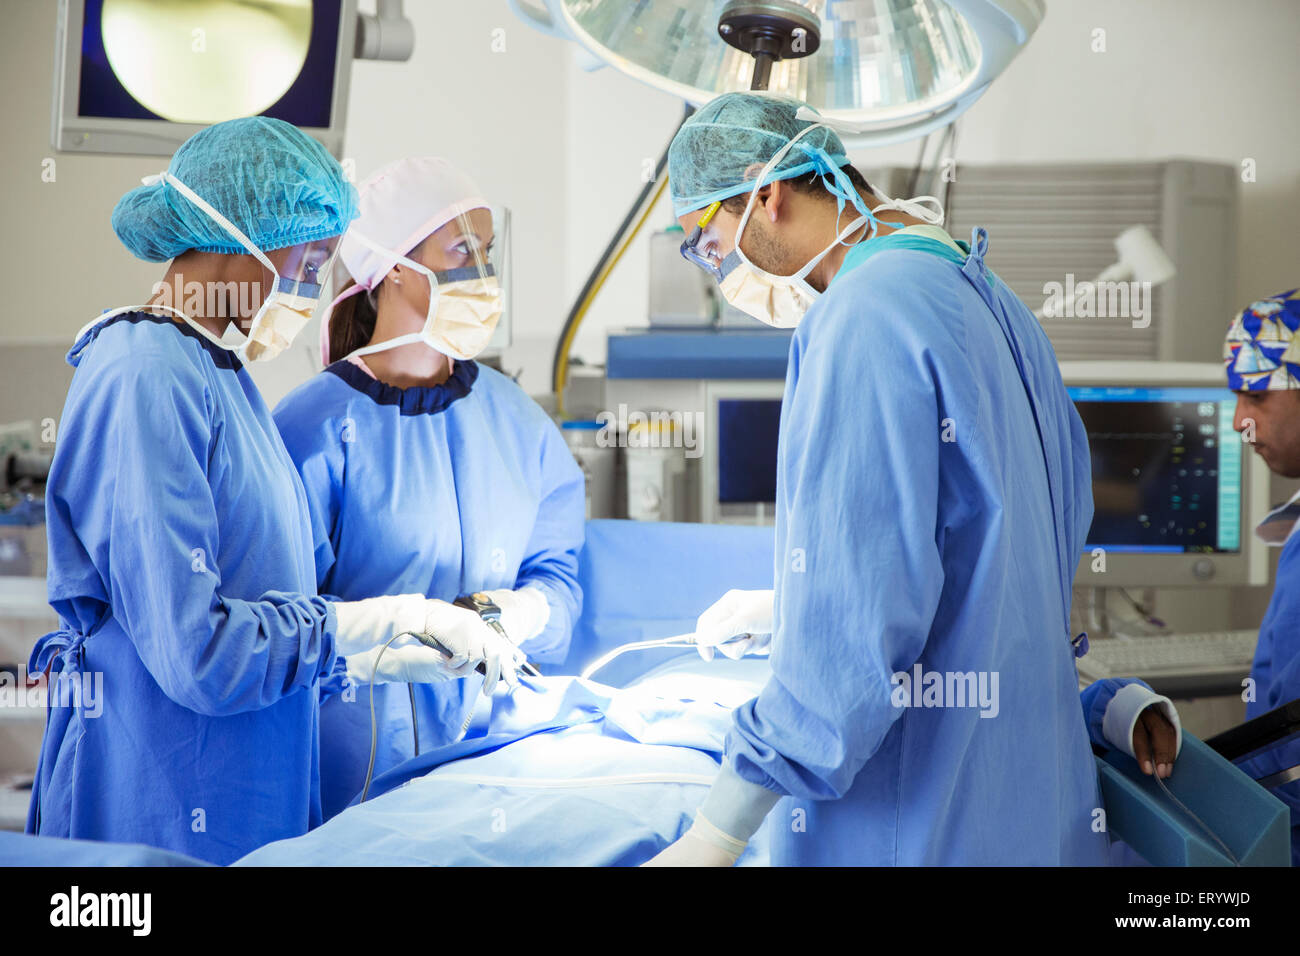 Surgeons performing surgery in operating room Stock Photo